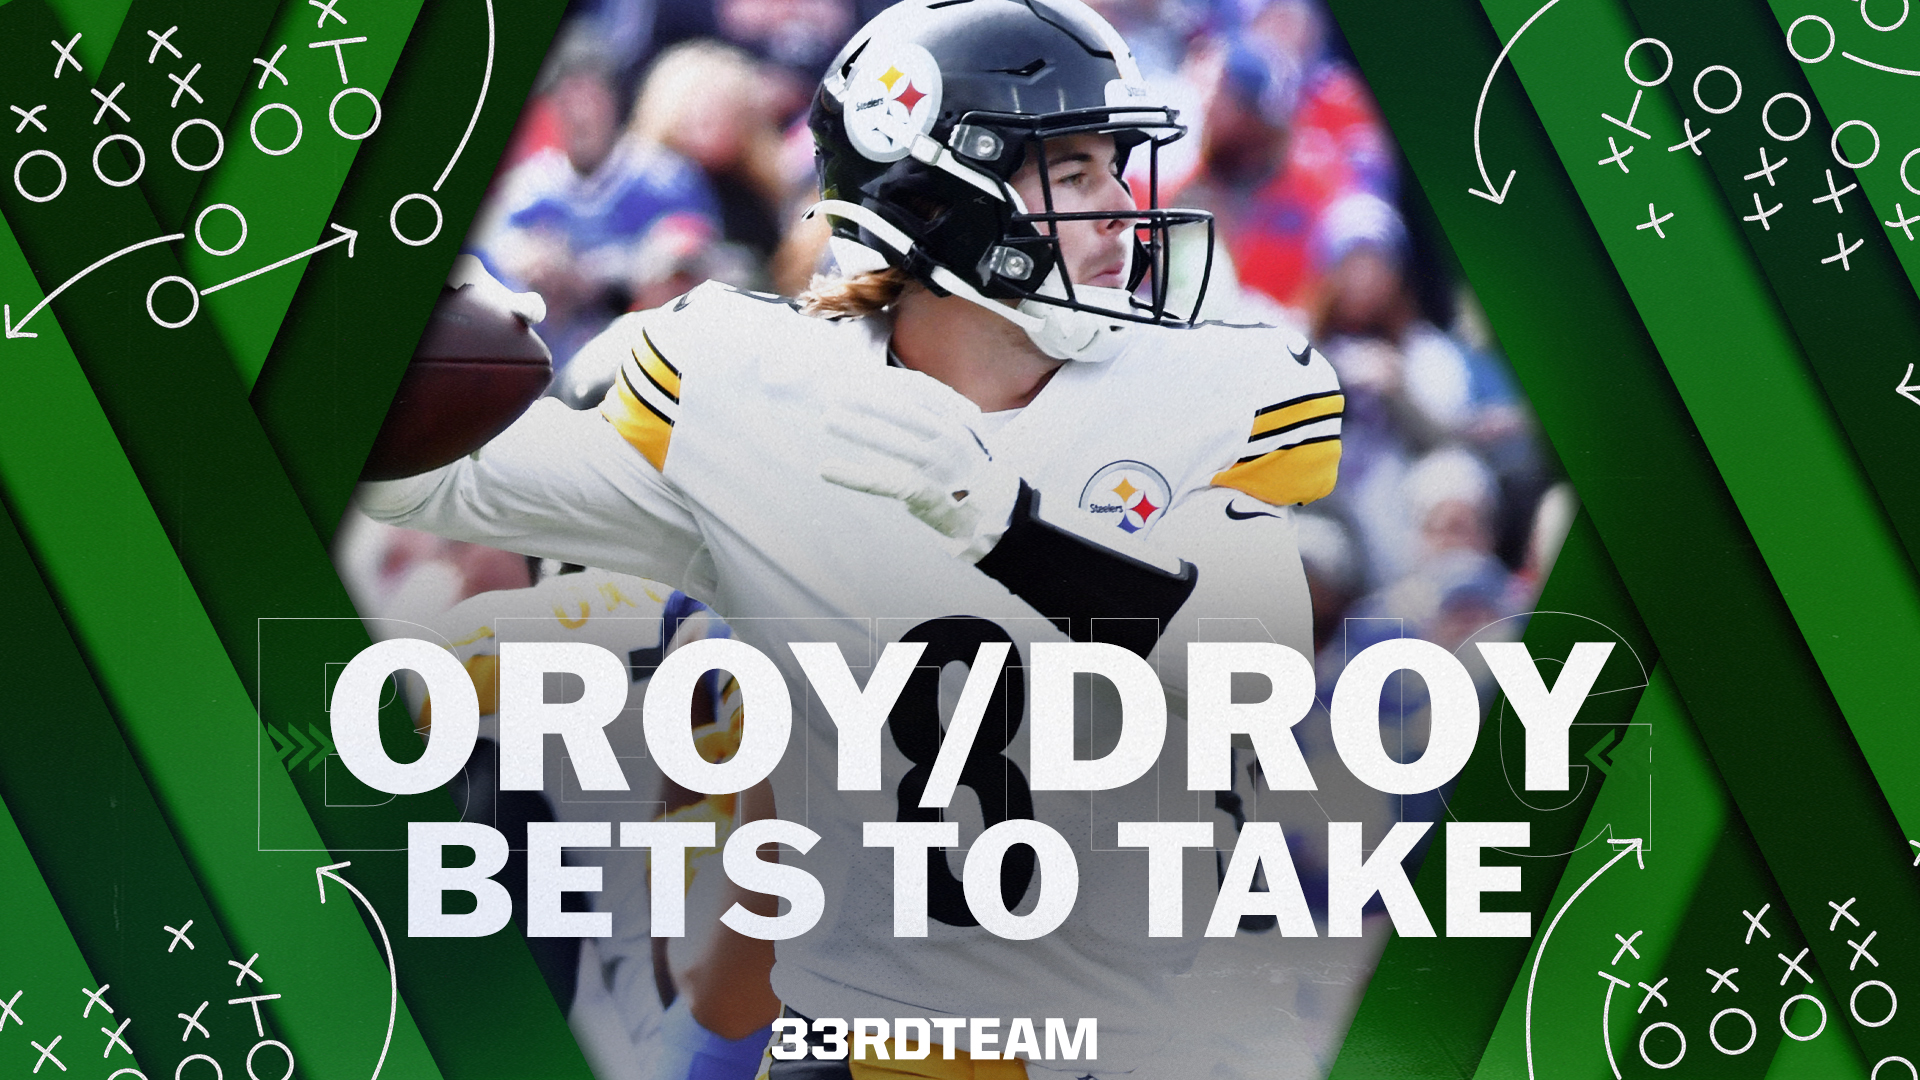 OROY and DROY Bets to Take After NFL Week 5